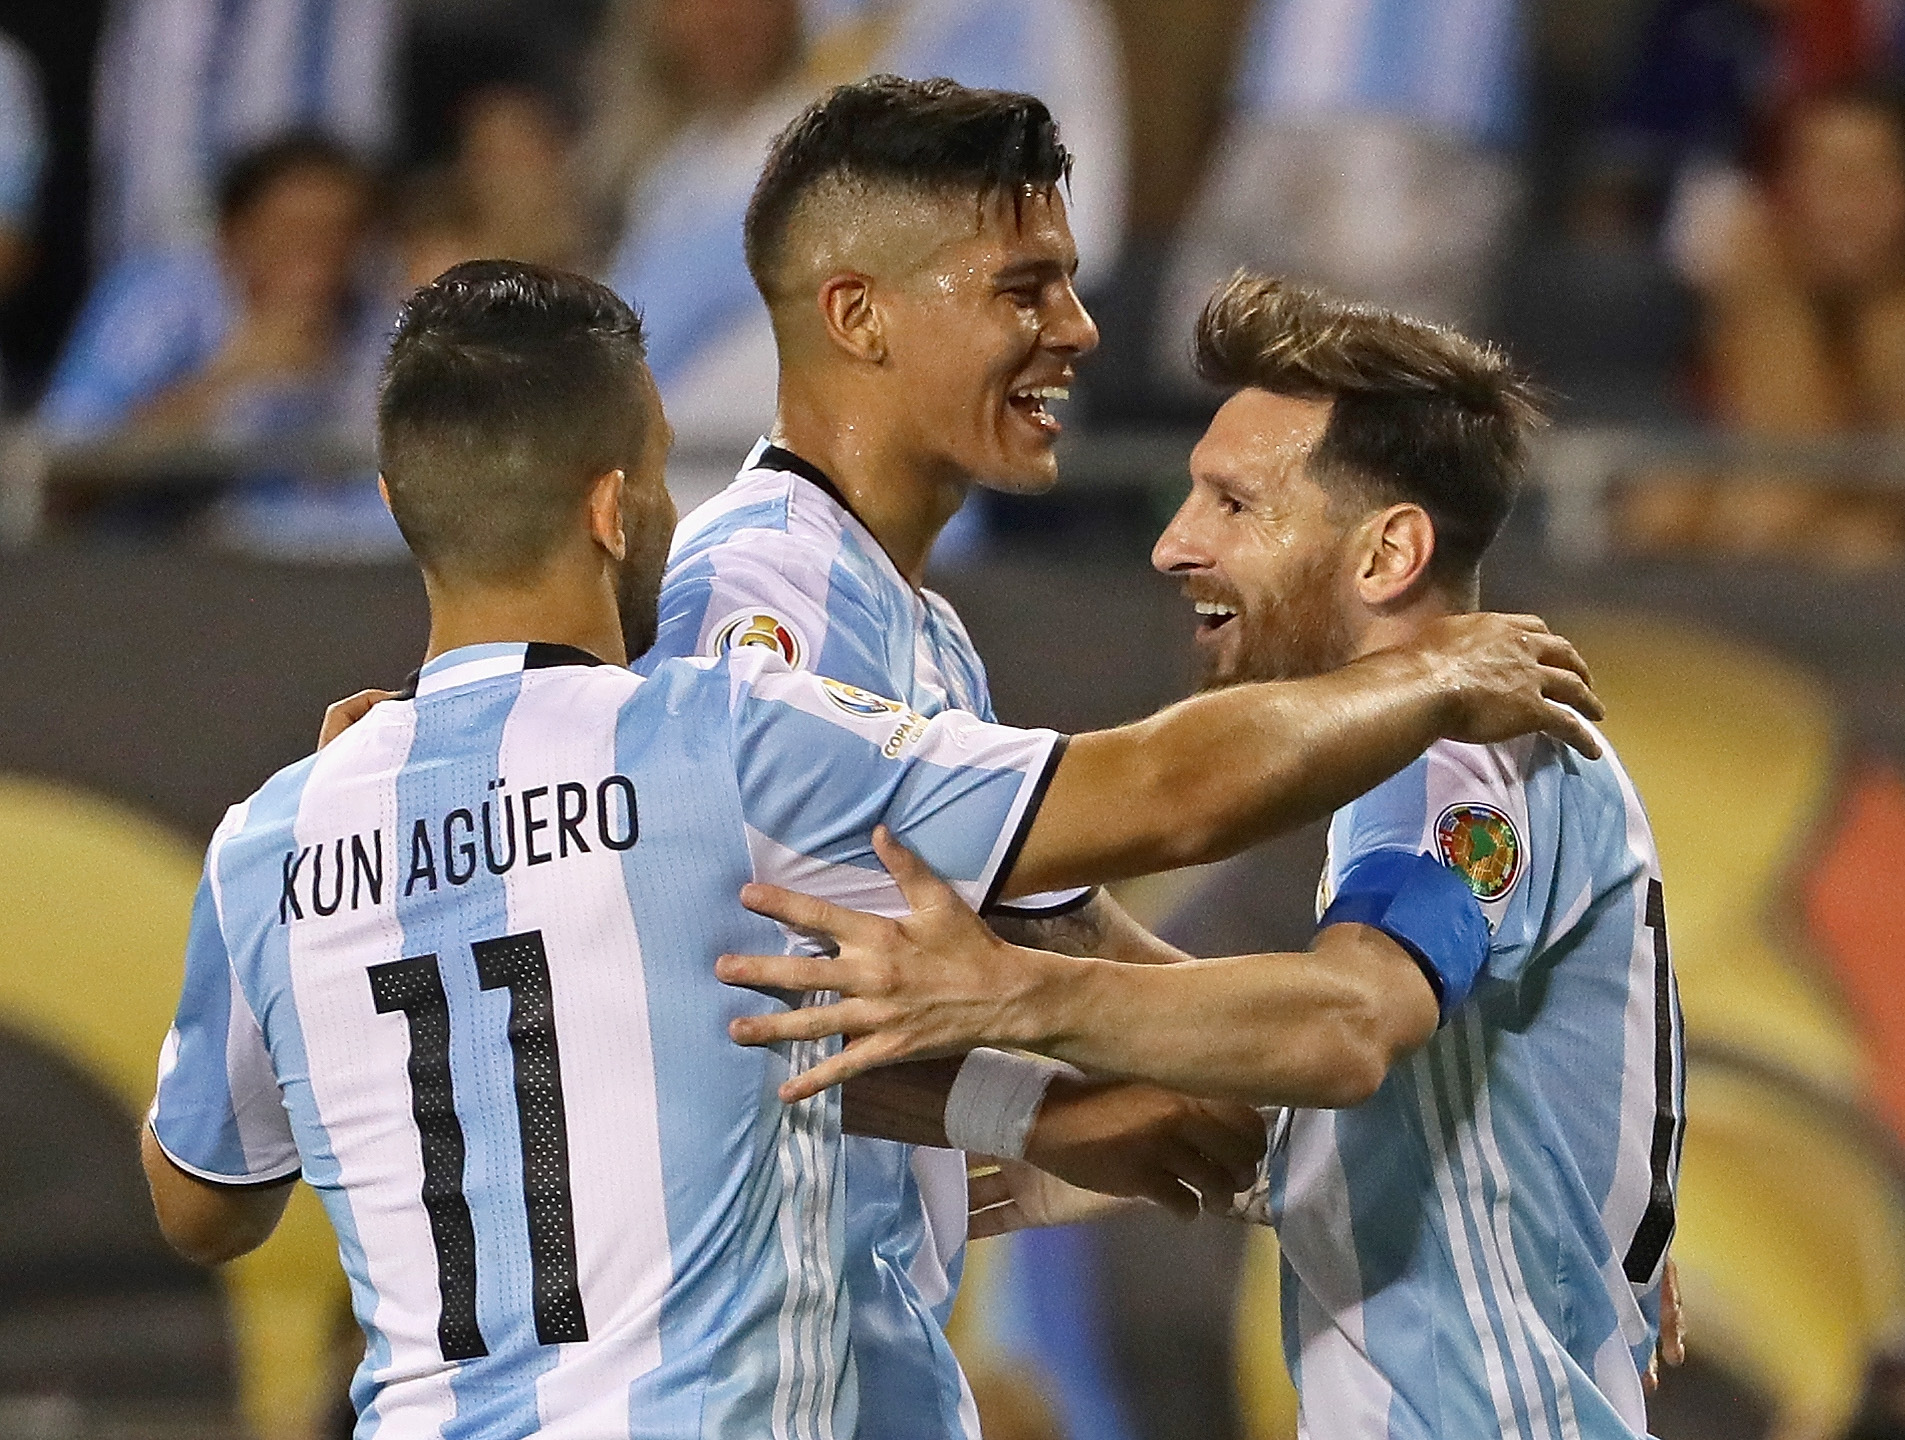 Argentina vs. Bolivia, argentina lineup, argentina xi, starting xi, start time, tv channel, today, when, lineups, is messi starting, Argentina vs. Bolivia partido, Argentina vs. Bolivia horario